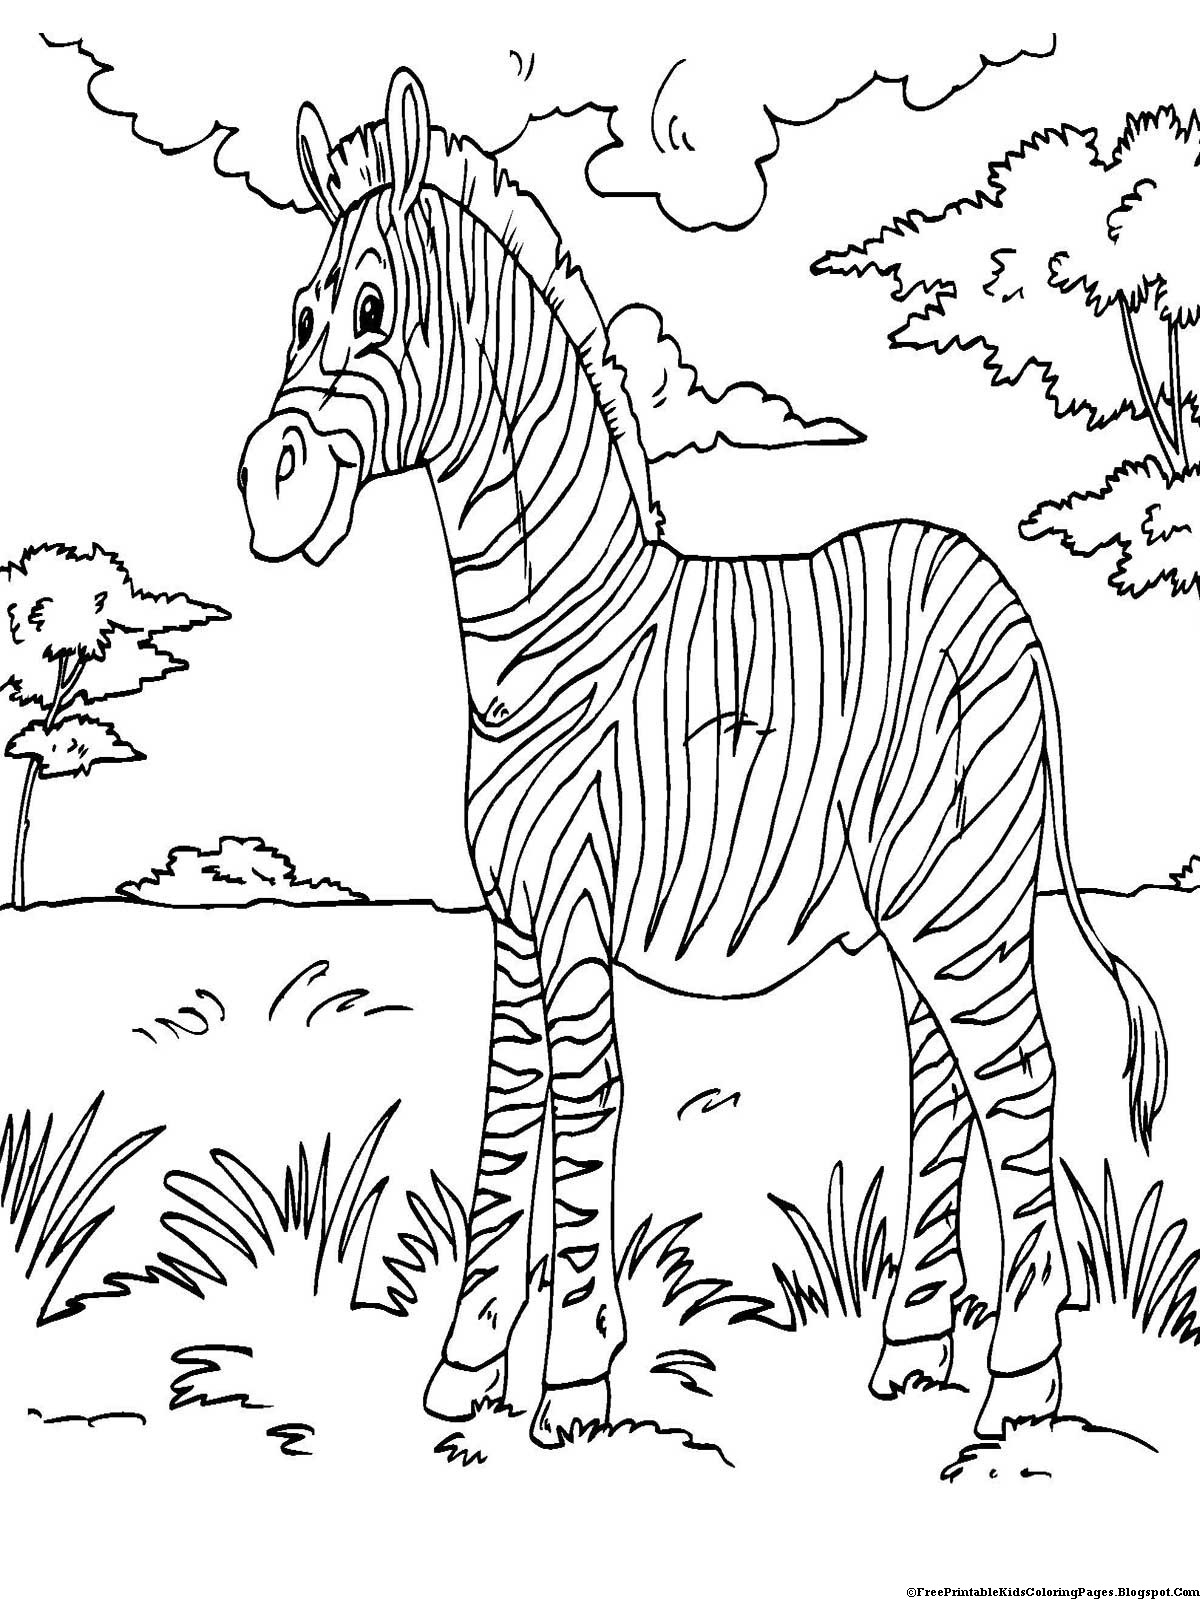 Coloring Pages Free Printable
 Zebra Coloring Pages Free Printable Kids Coloring Pages